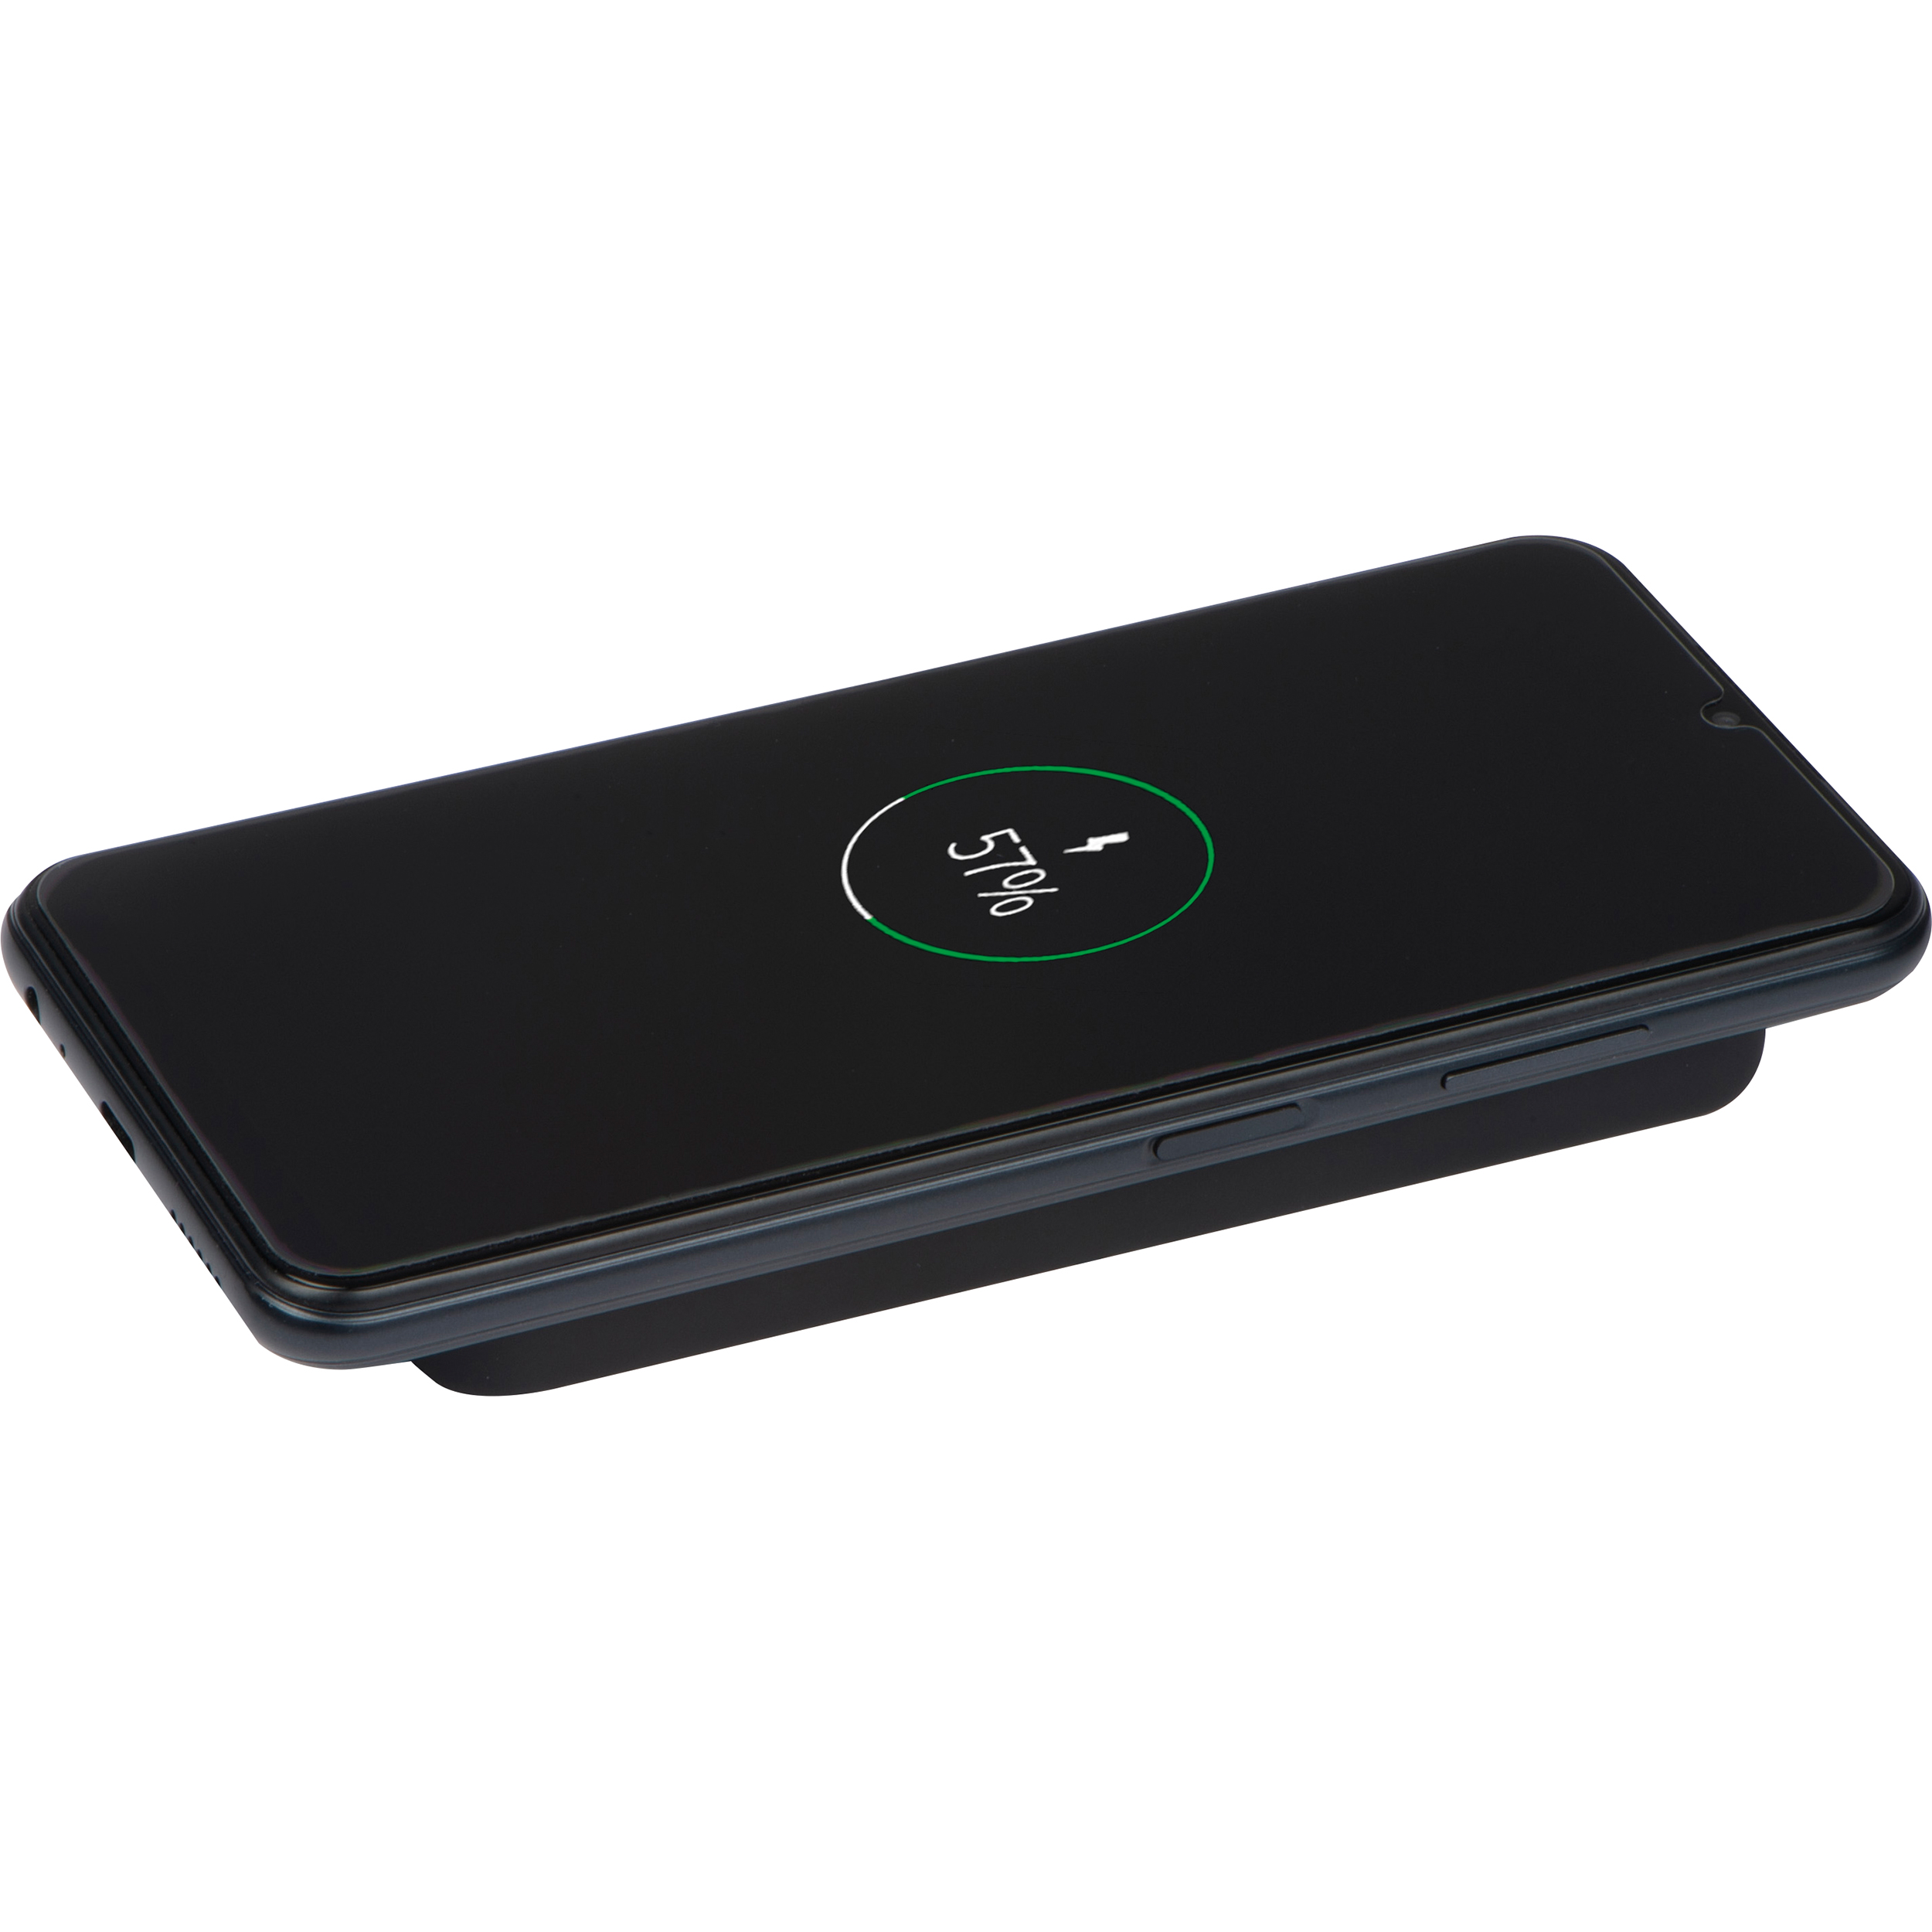 Wireless charger and powerbank, 8000 mAh